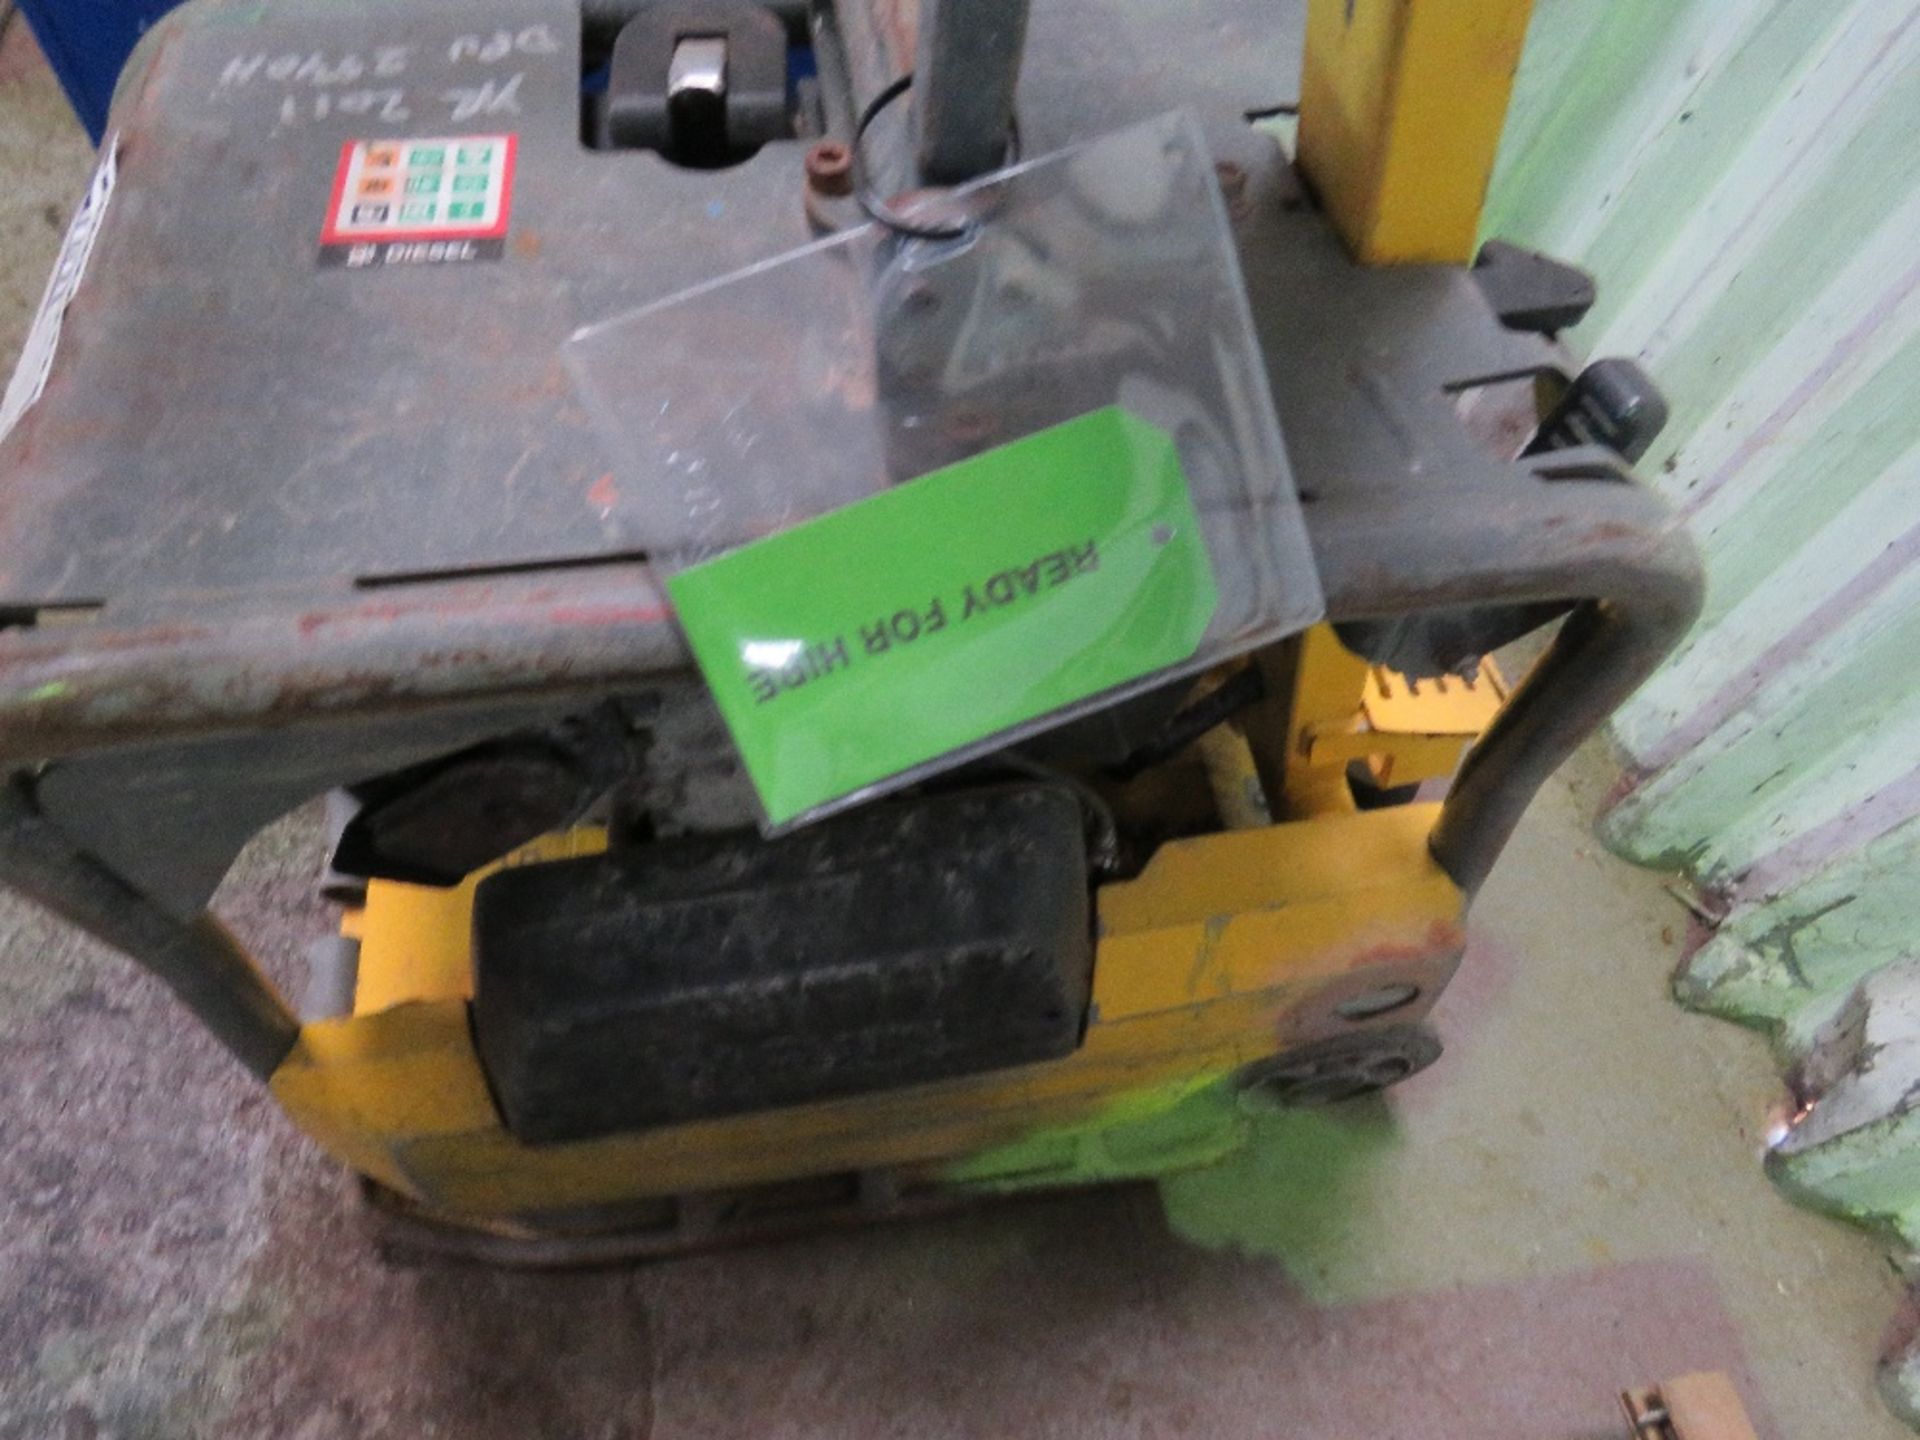 WACKER NEUSON DPU2540H COMPACTION PLATE. YEAR 2011. WHEN TESTED WAS SEEN TO RUN AND VIBRATE. DIRECT - Image 2 of 3